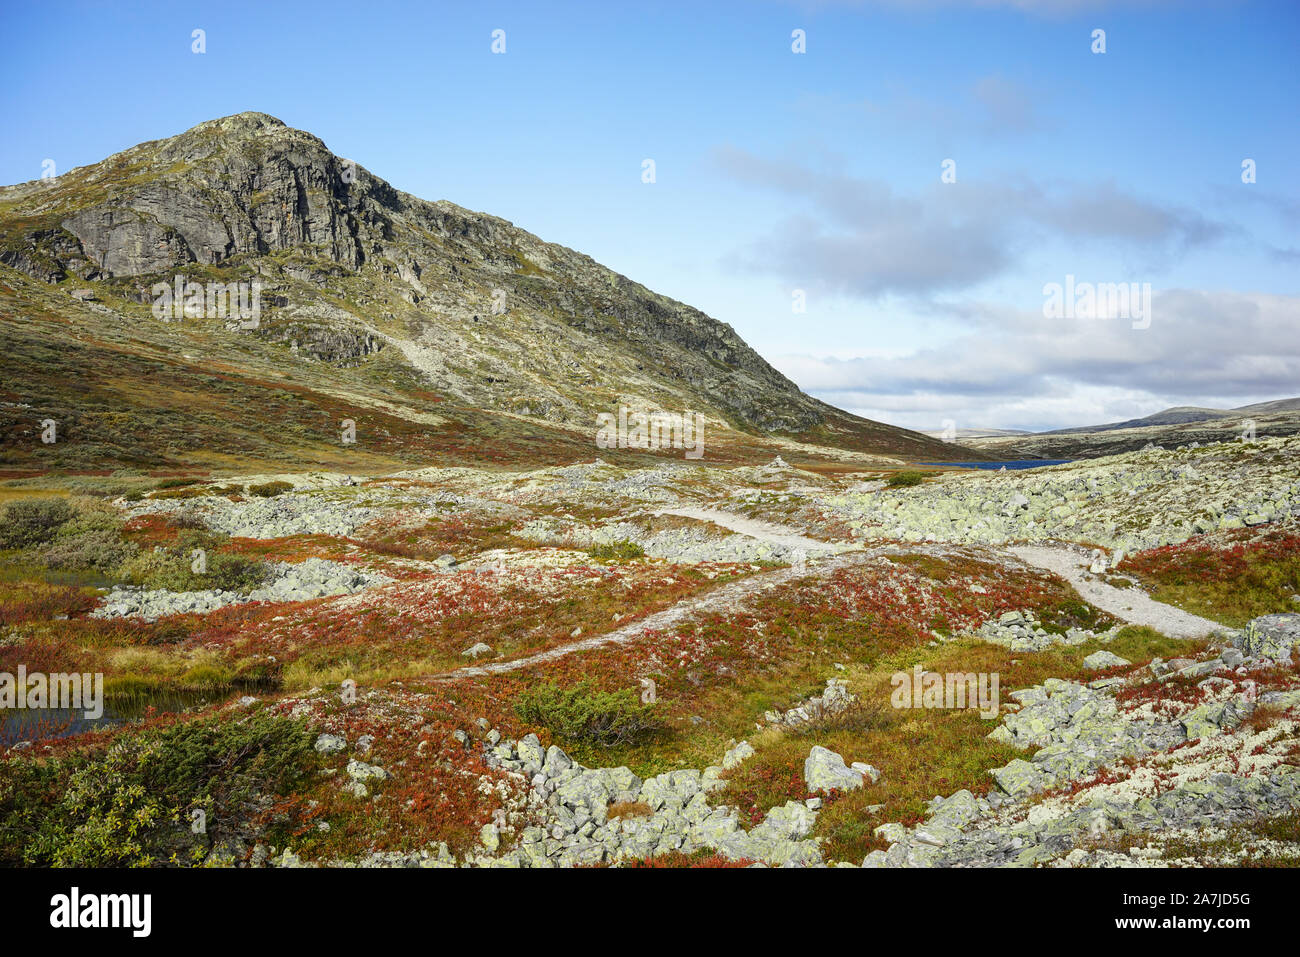 Summer at the Rondane National Park in Norway near Smuksjøseter fjellstue and Høvringen. Included are mountains and Peer Gynt cabin in the park. Stock Photo